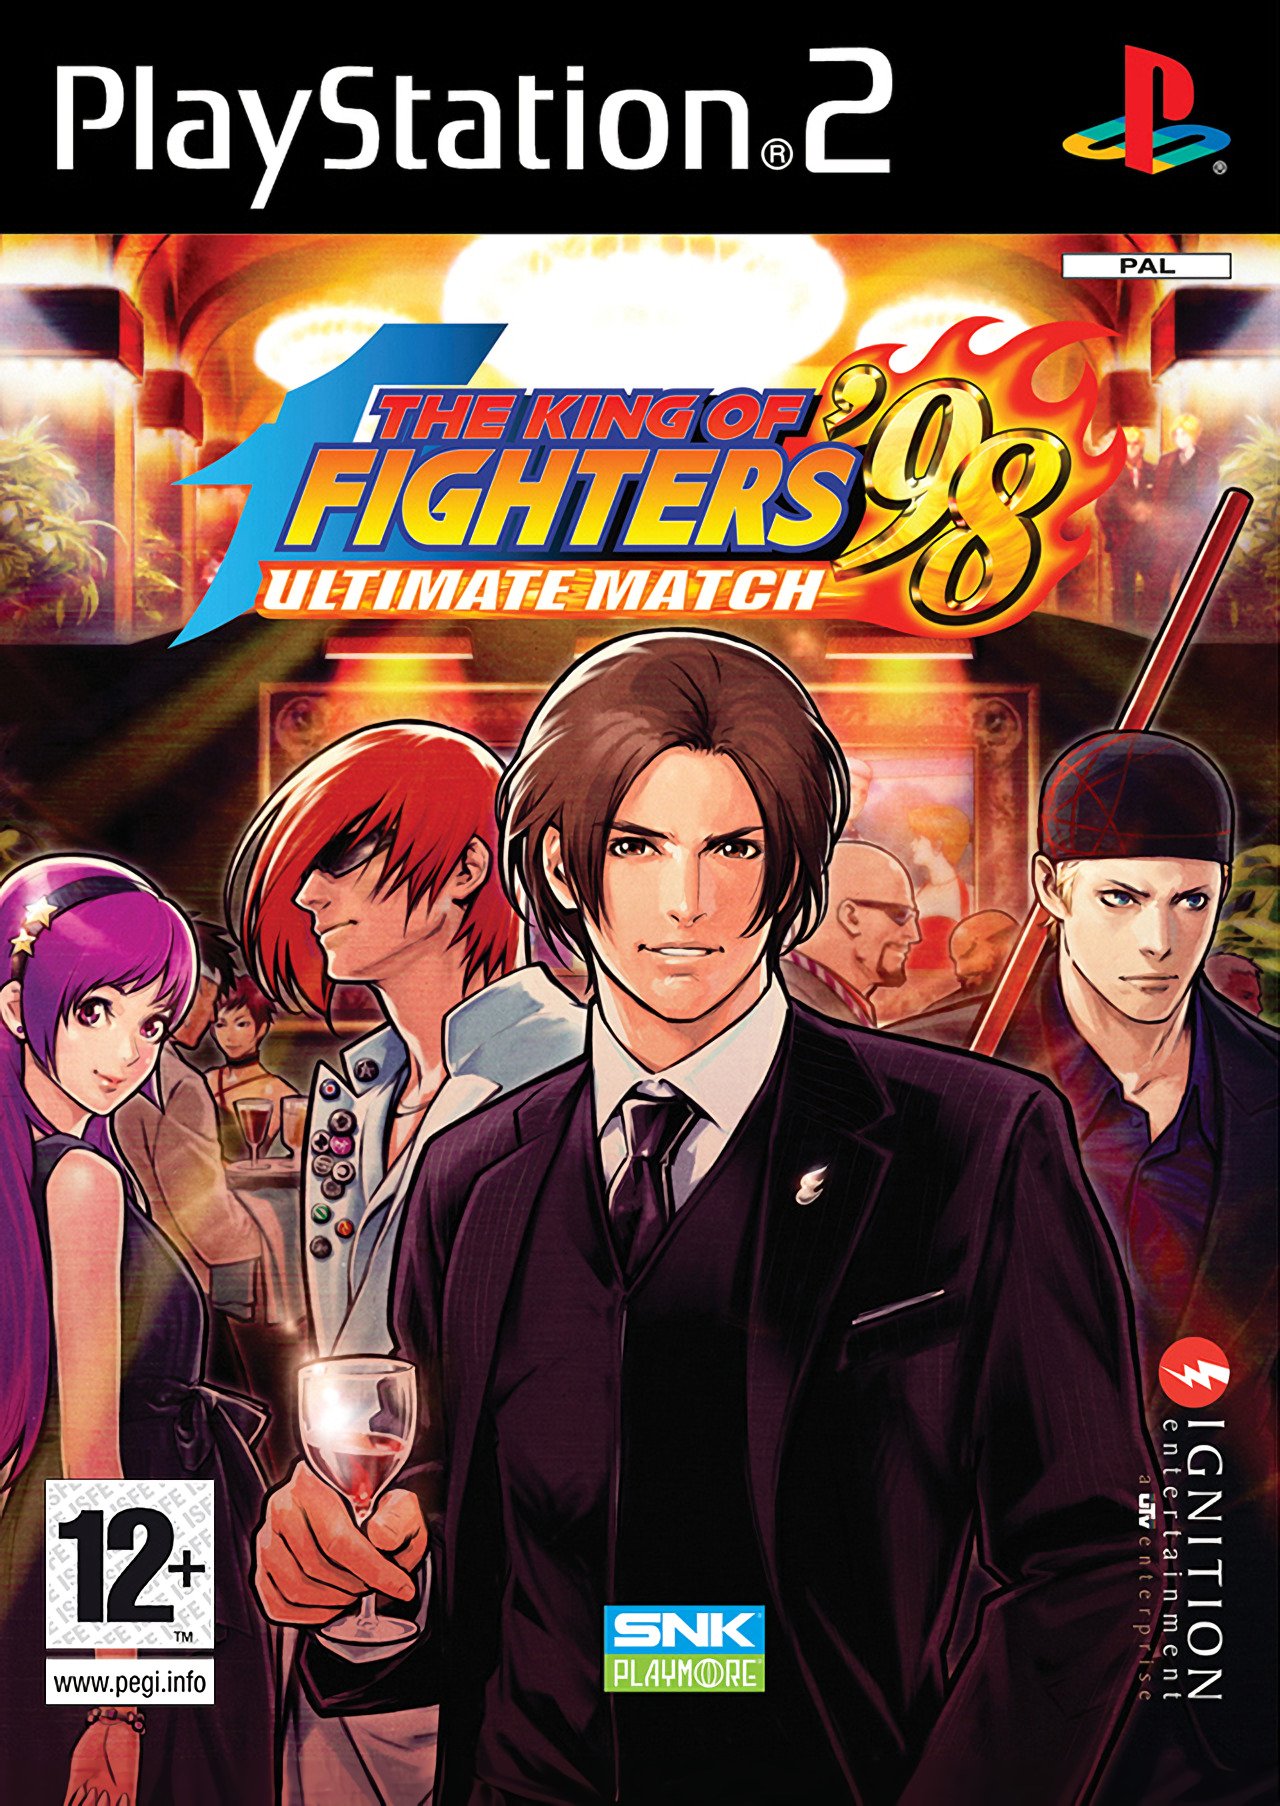 The King of Fighters '97 ROM & ISO